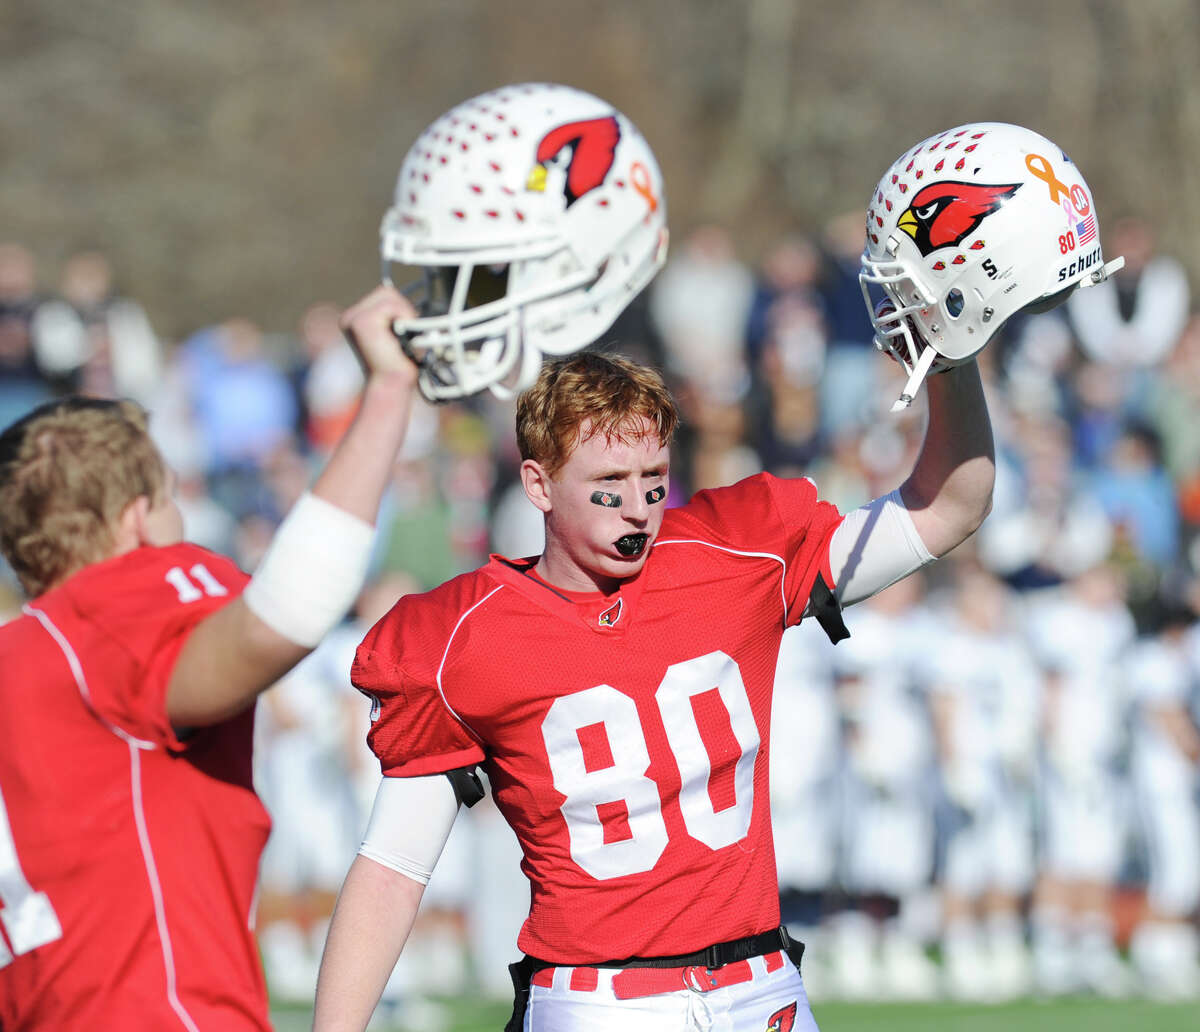 Alex McMurray, left, and Joe Kelly, right, of Greenwich raise their helmets before the start of the 2012 FCIAC championship.